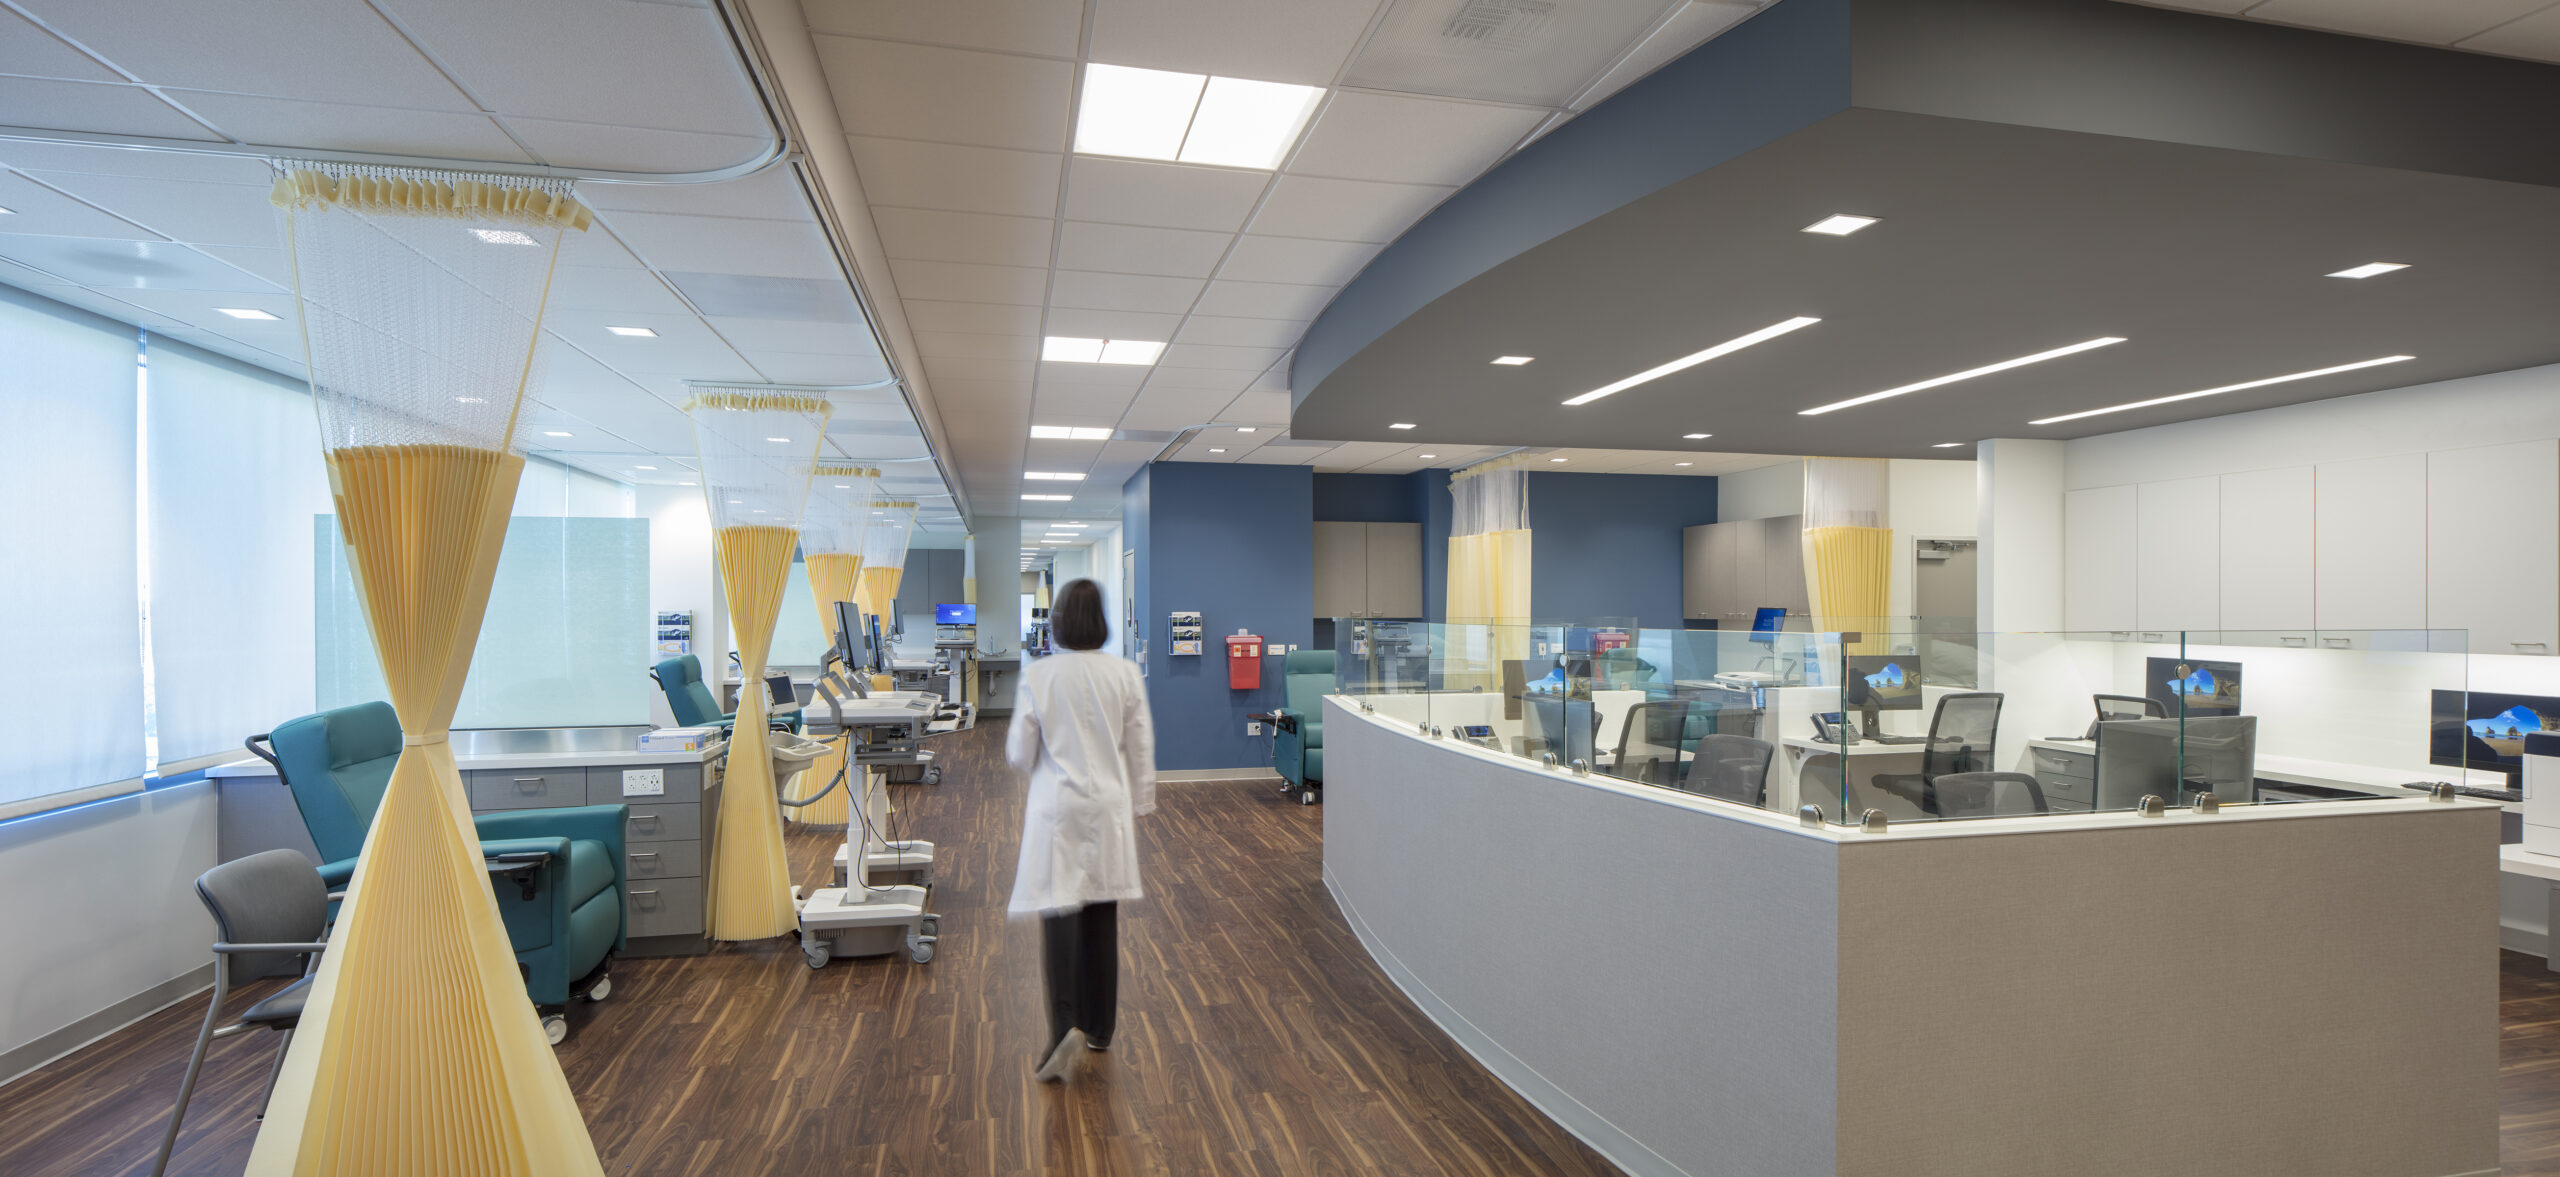 fs-design-group-completes-efficient-welcoming-space-for-palomar-medical-center-escondido